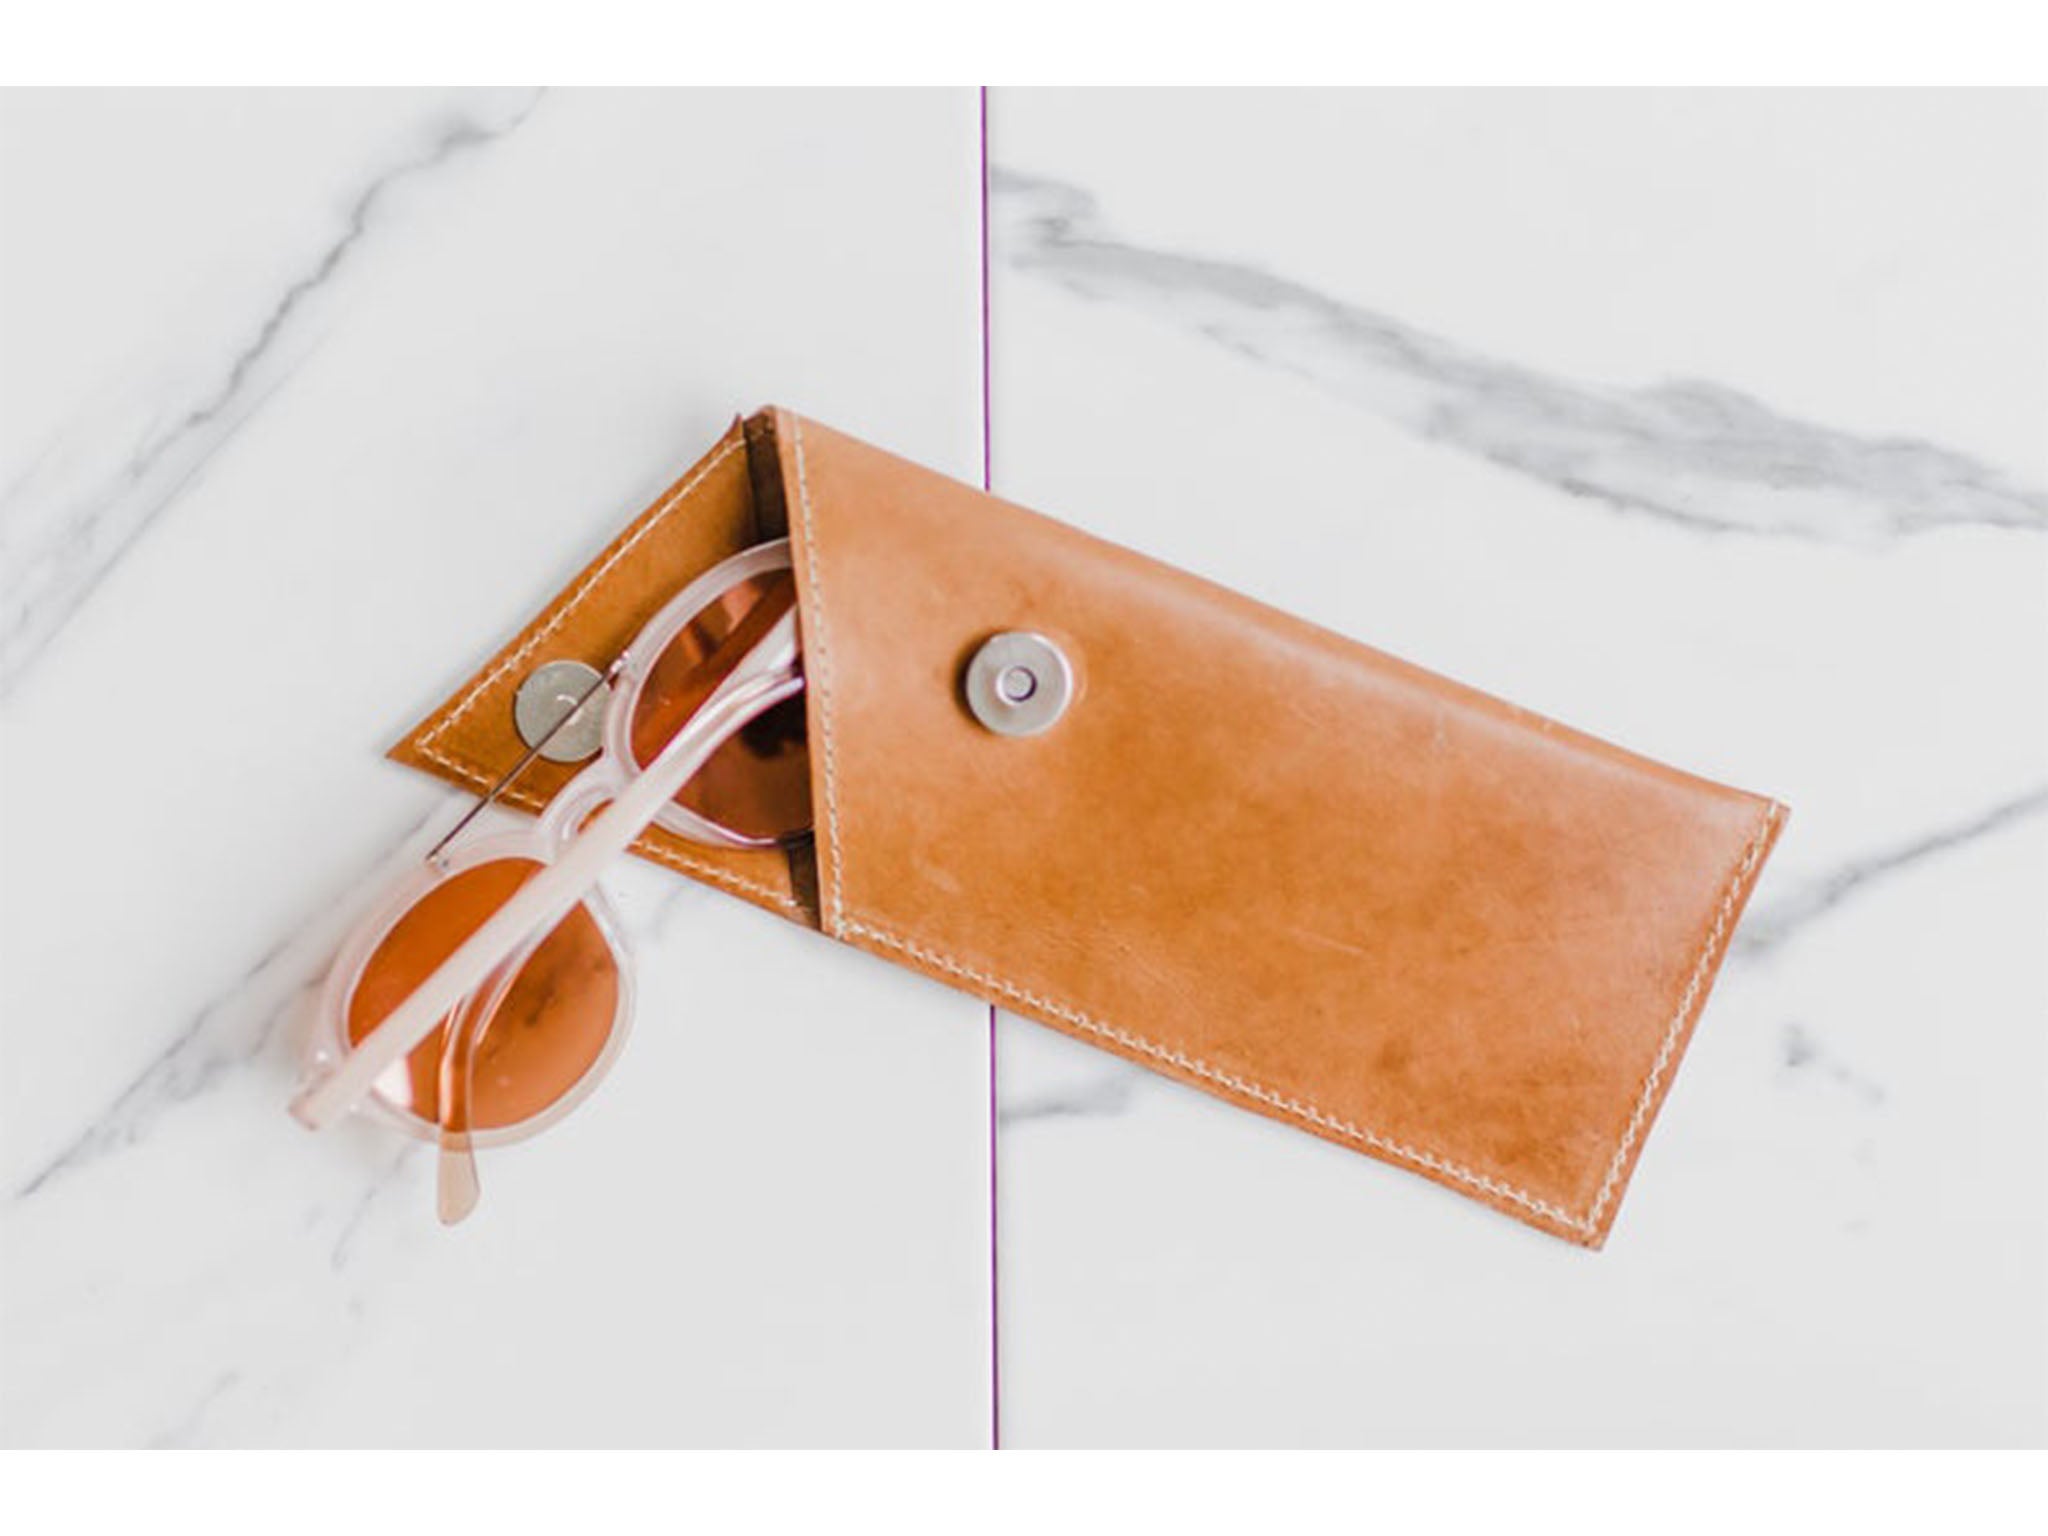 When you're not wearing them, keep your glasses safe in this leather pouch